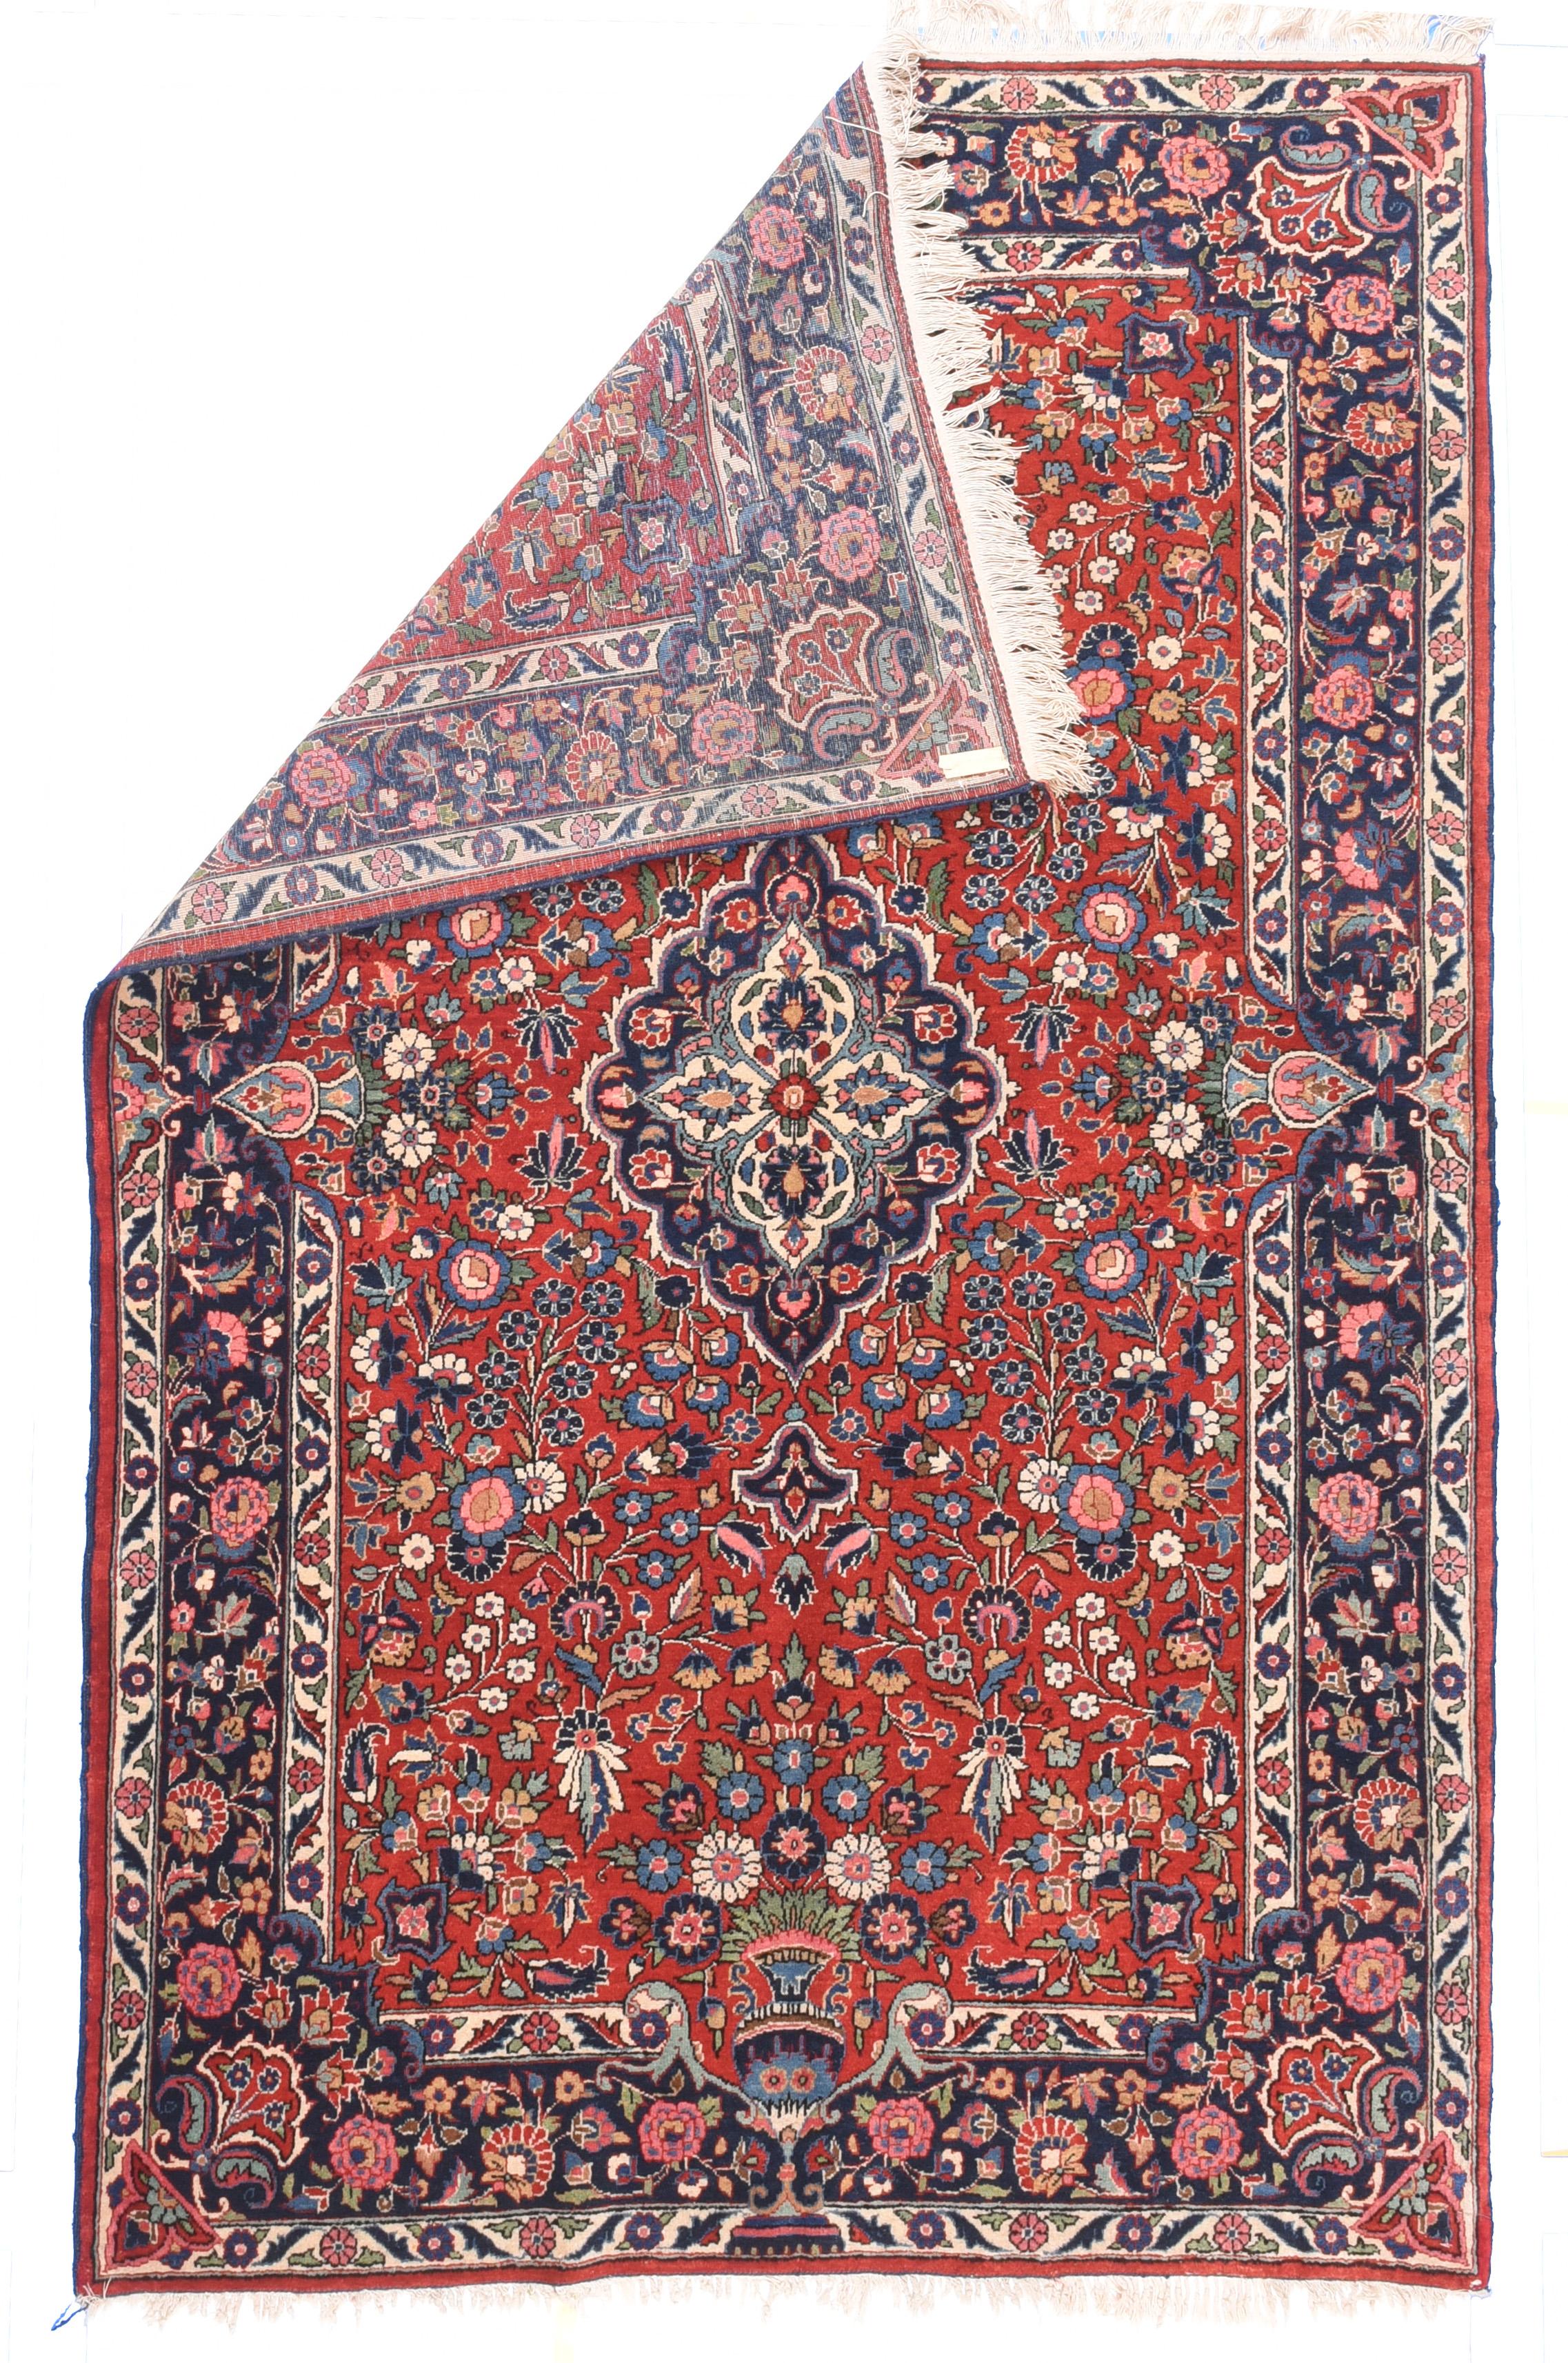 Vintage Kashan Rug 4'4'' x 6'10''. The crisp red field, with a wide variety of Persian garden flowers, flows around the small lightly scalloped navy medallion with reduced pendants, and is invaded by vases and floral bouquets from the navy border on